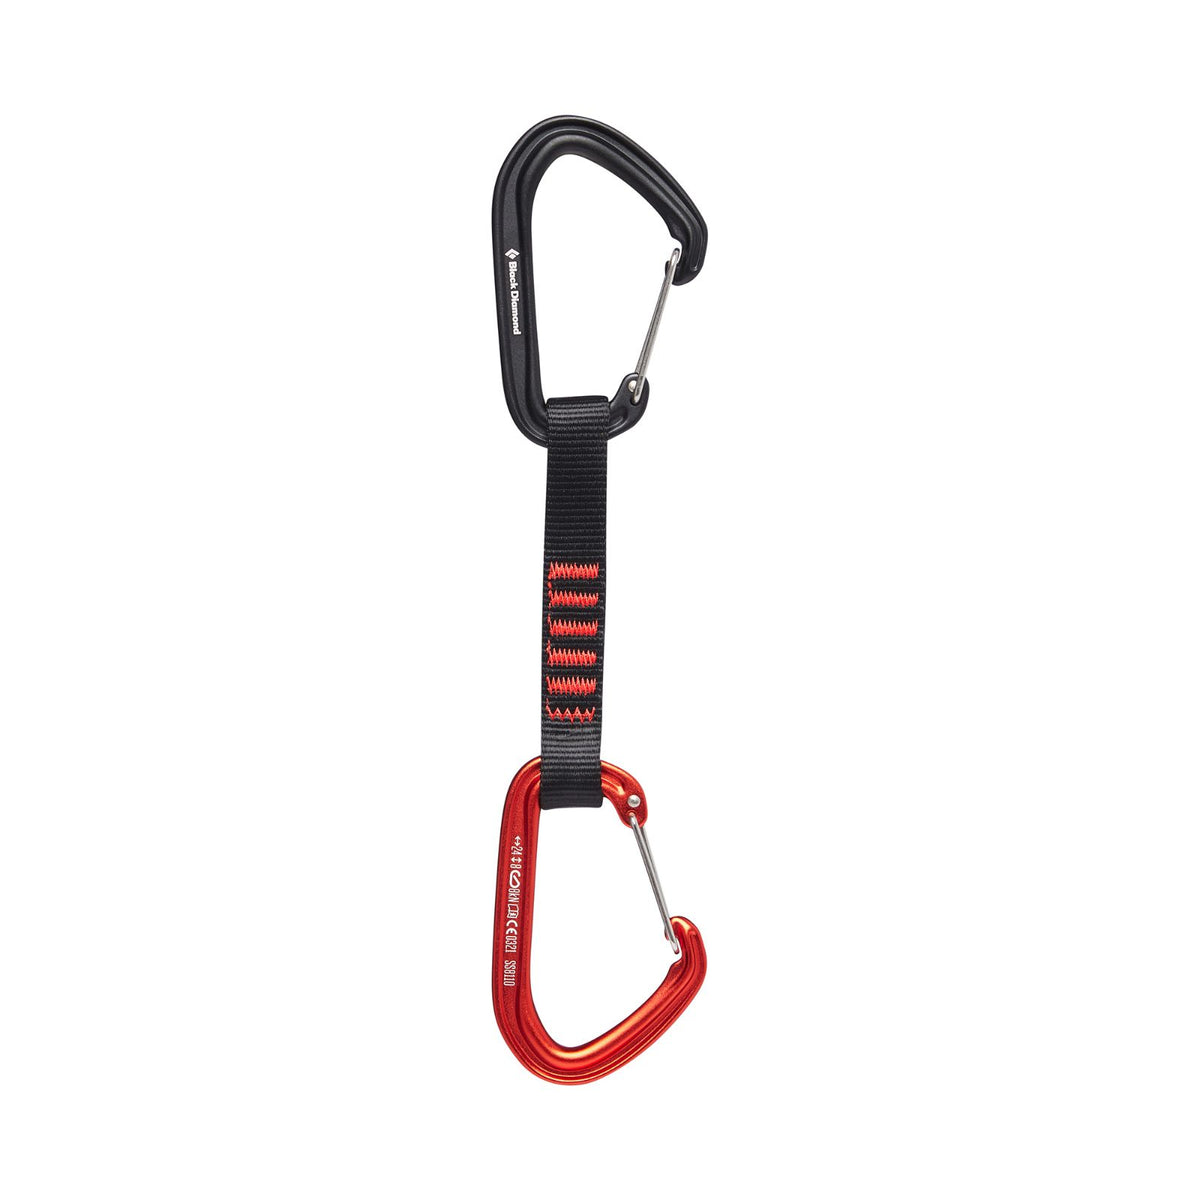 Black Diamond&#39;s lightweight and highly adaptable quickdraw features the updated HotWire wiregate carabiners.